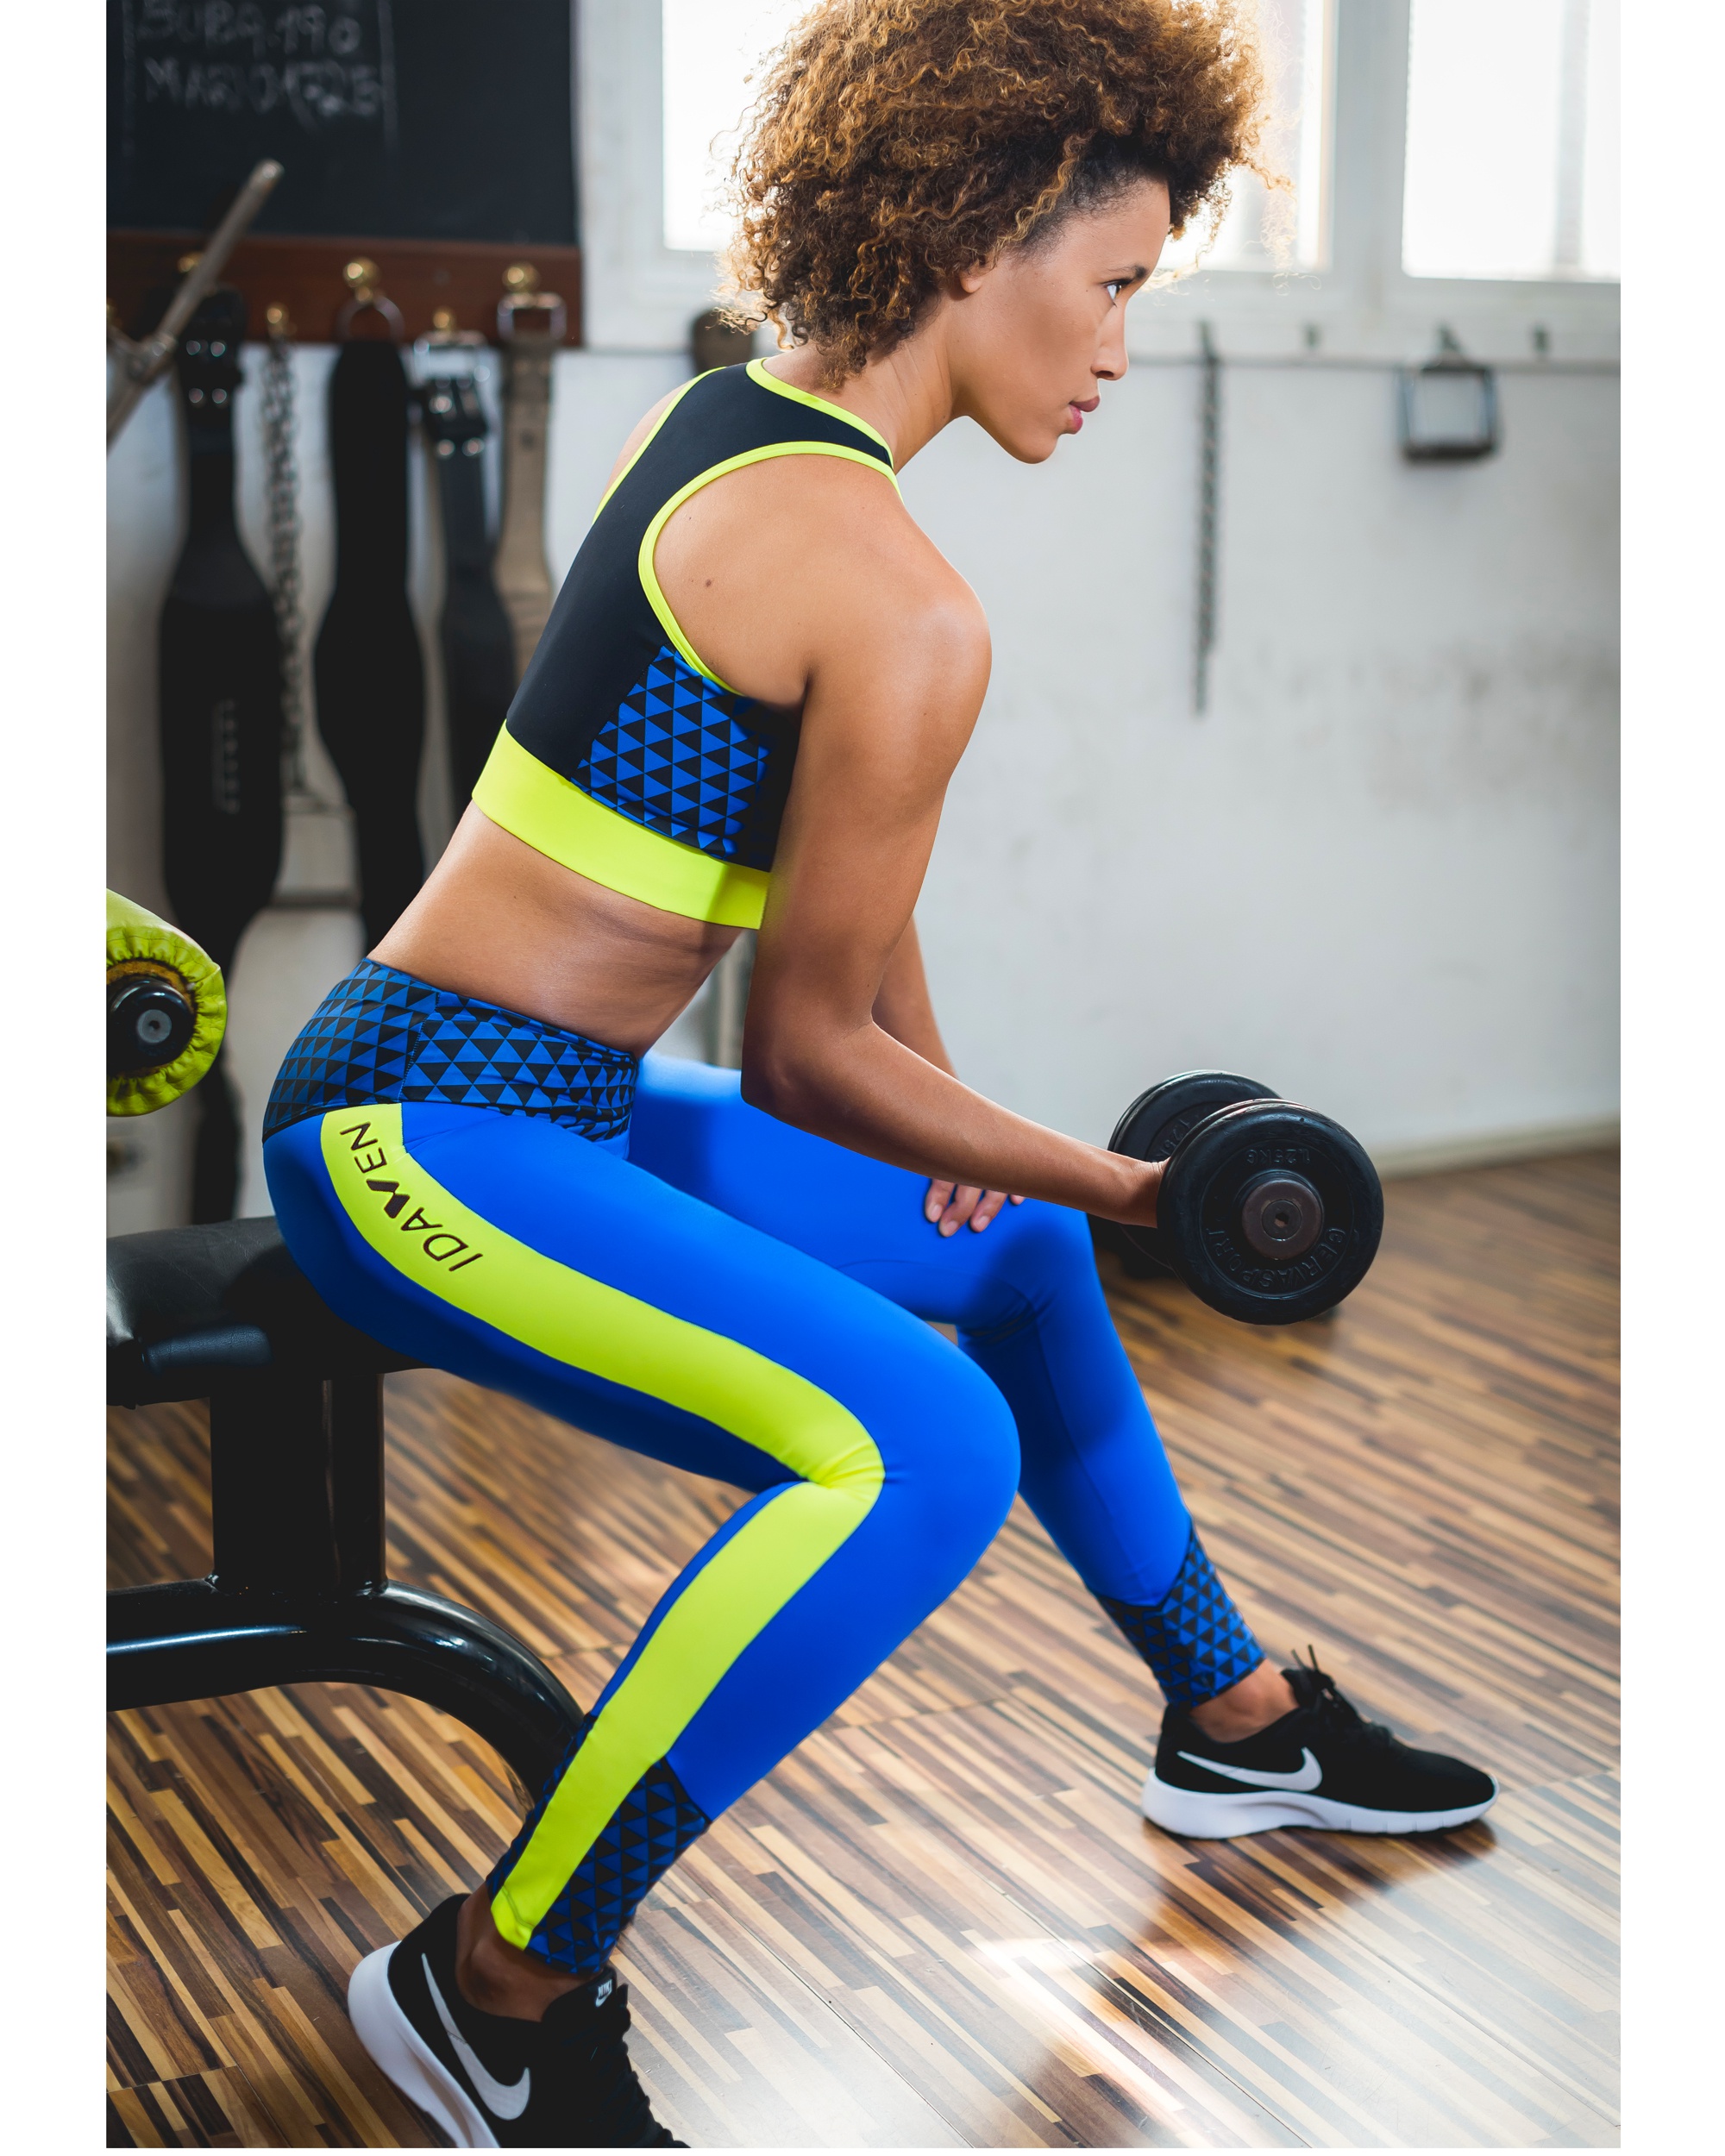 WOMEN LEGGINGS SPORT KLEIN Leggins made with one of the best